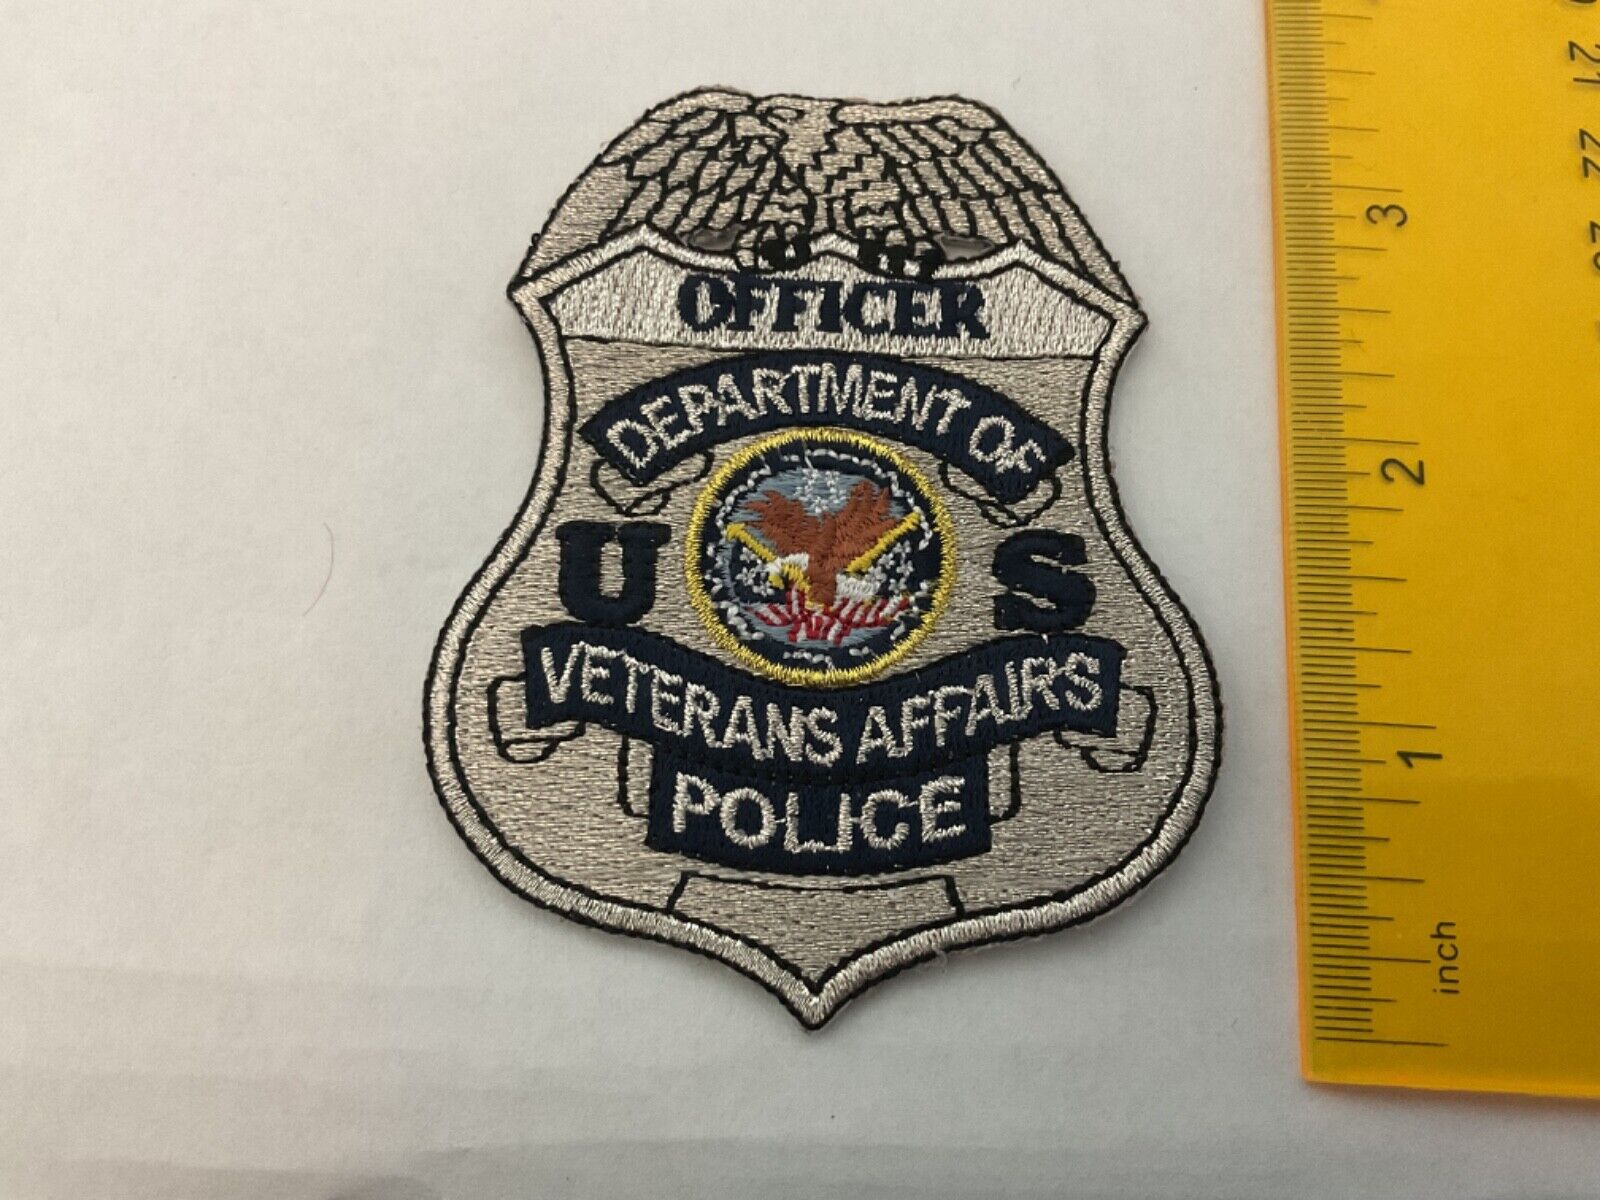 Police US Department Of Veterans Affairs Officer  collectible patch